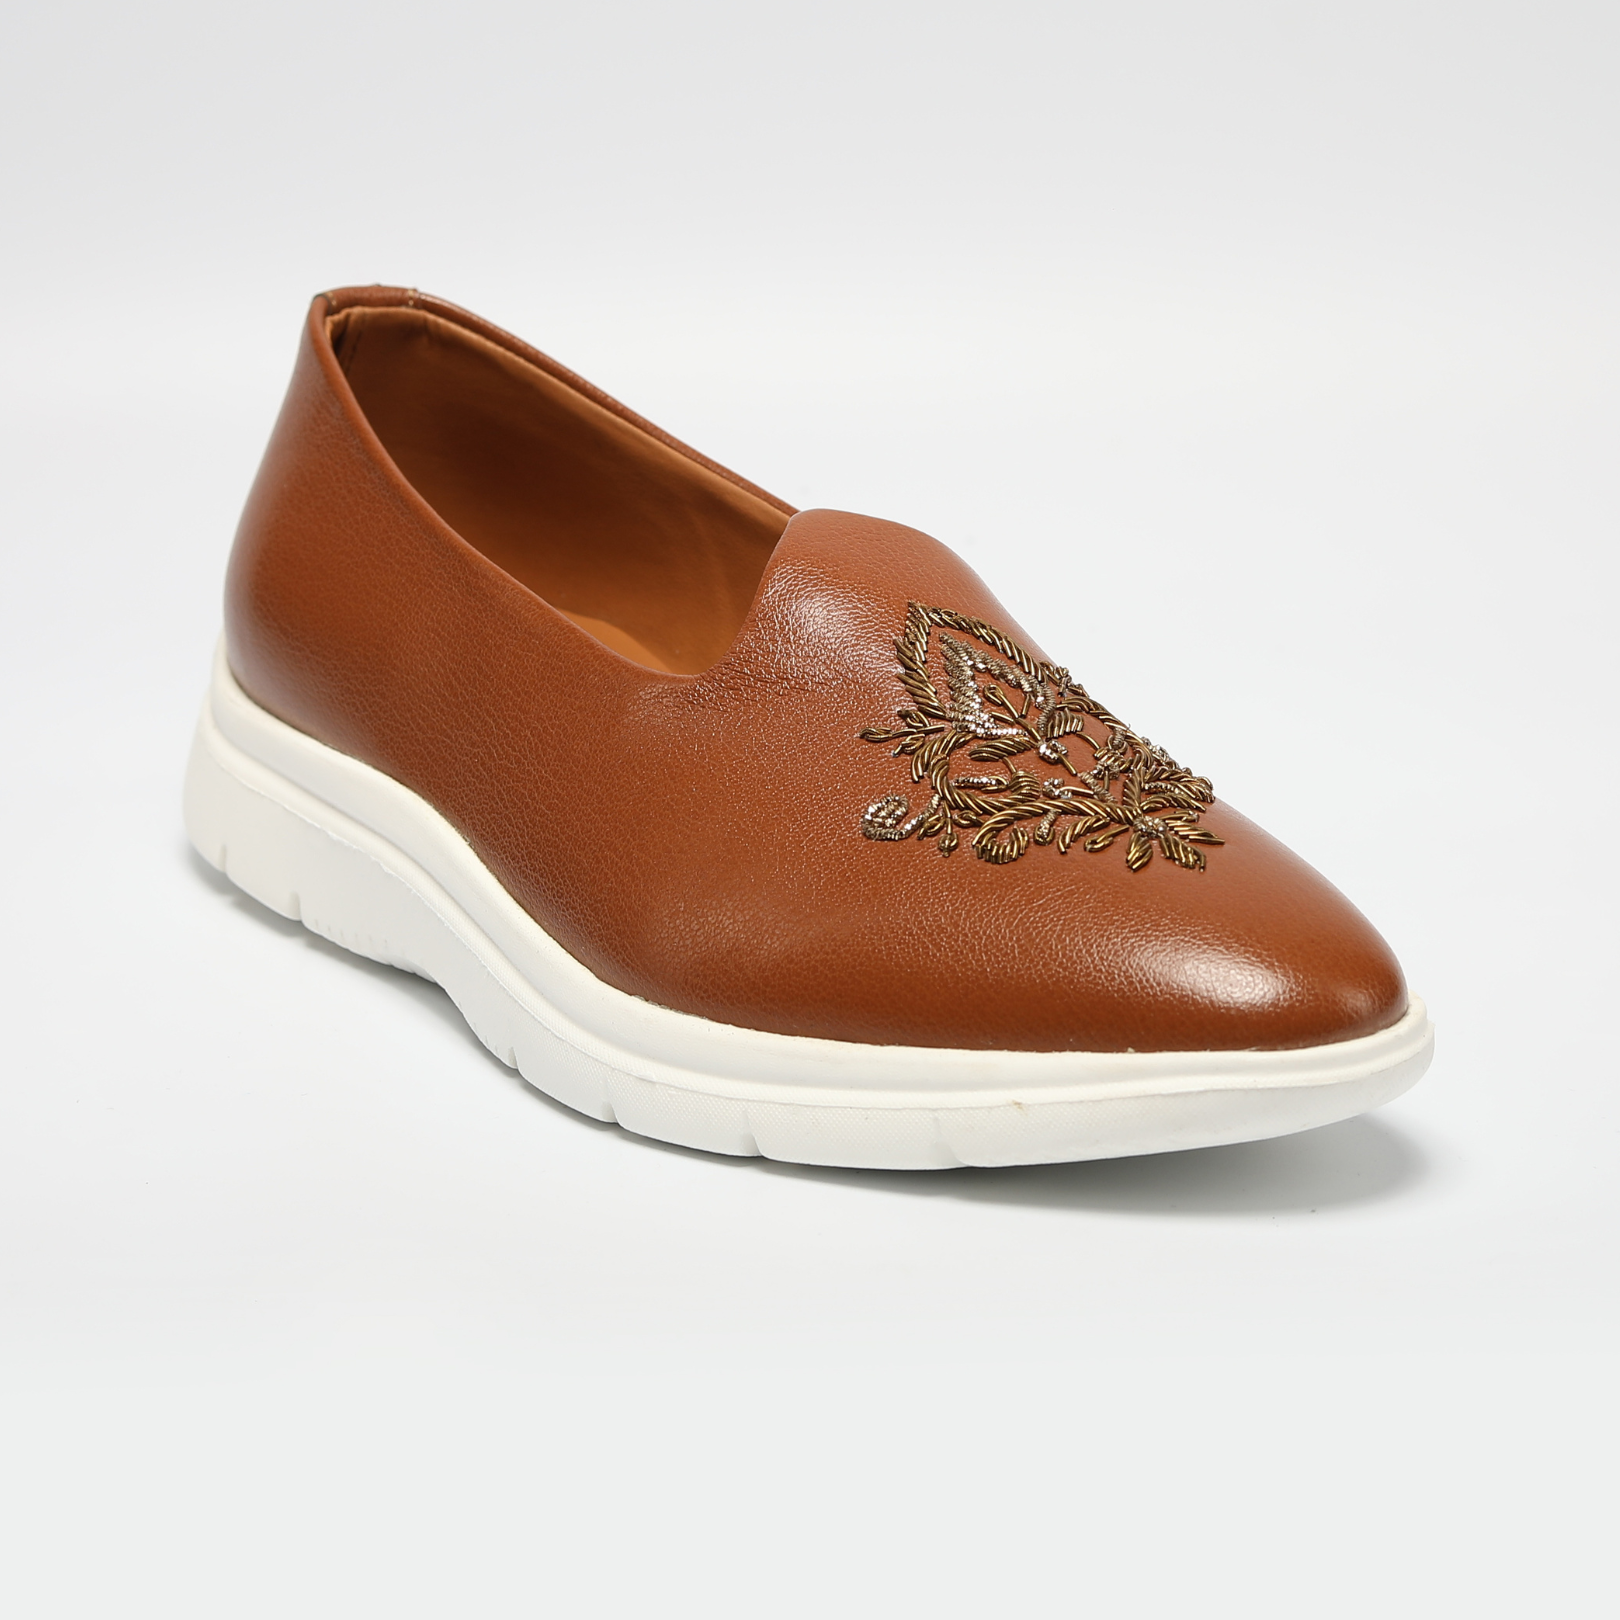 An ethnic design ReMx Mojari Sneakers - Tan with embroidered detailing, perfect for a festive occasion by Monkstory.